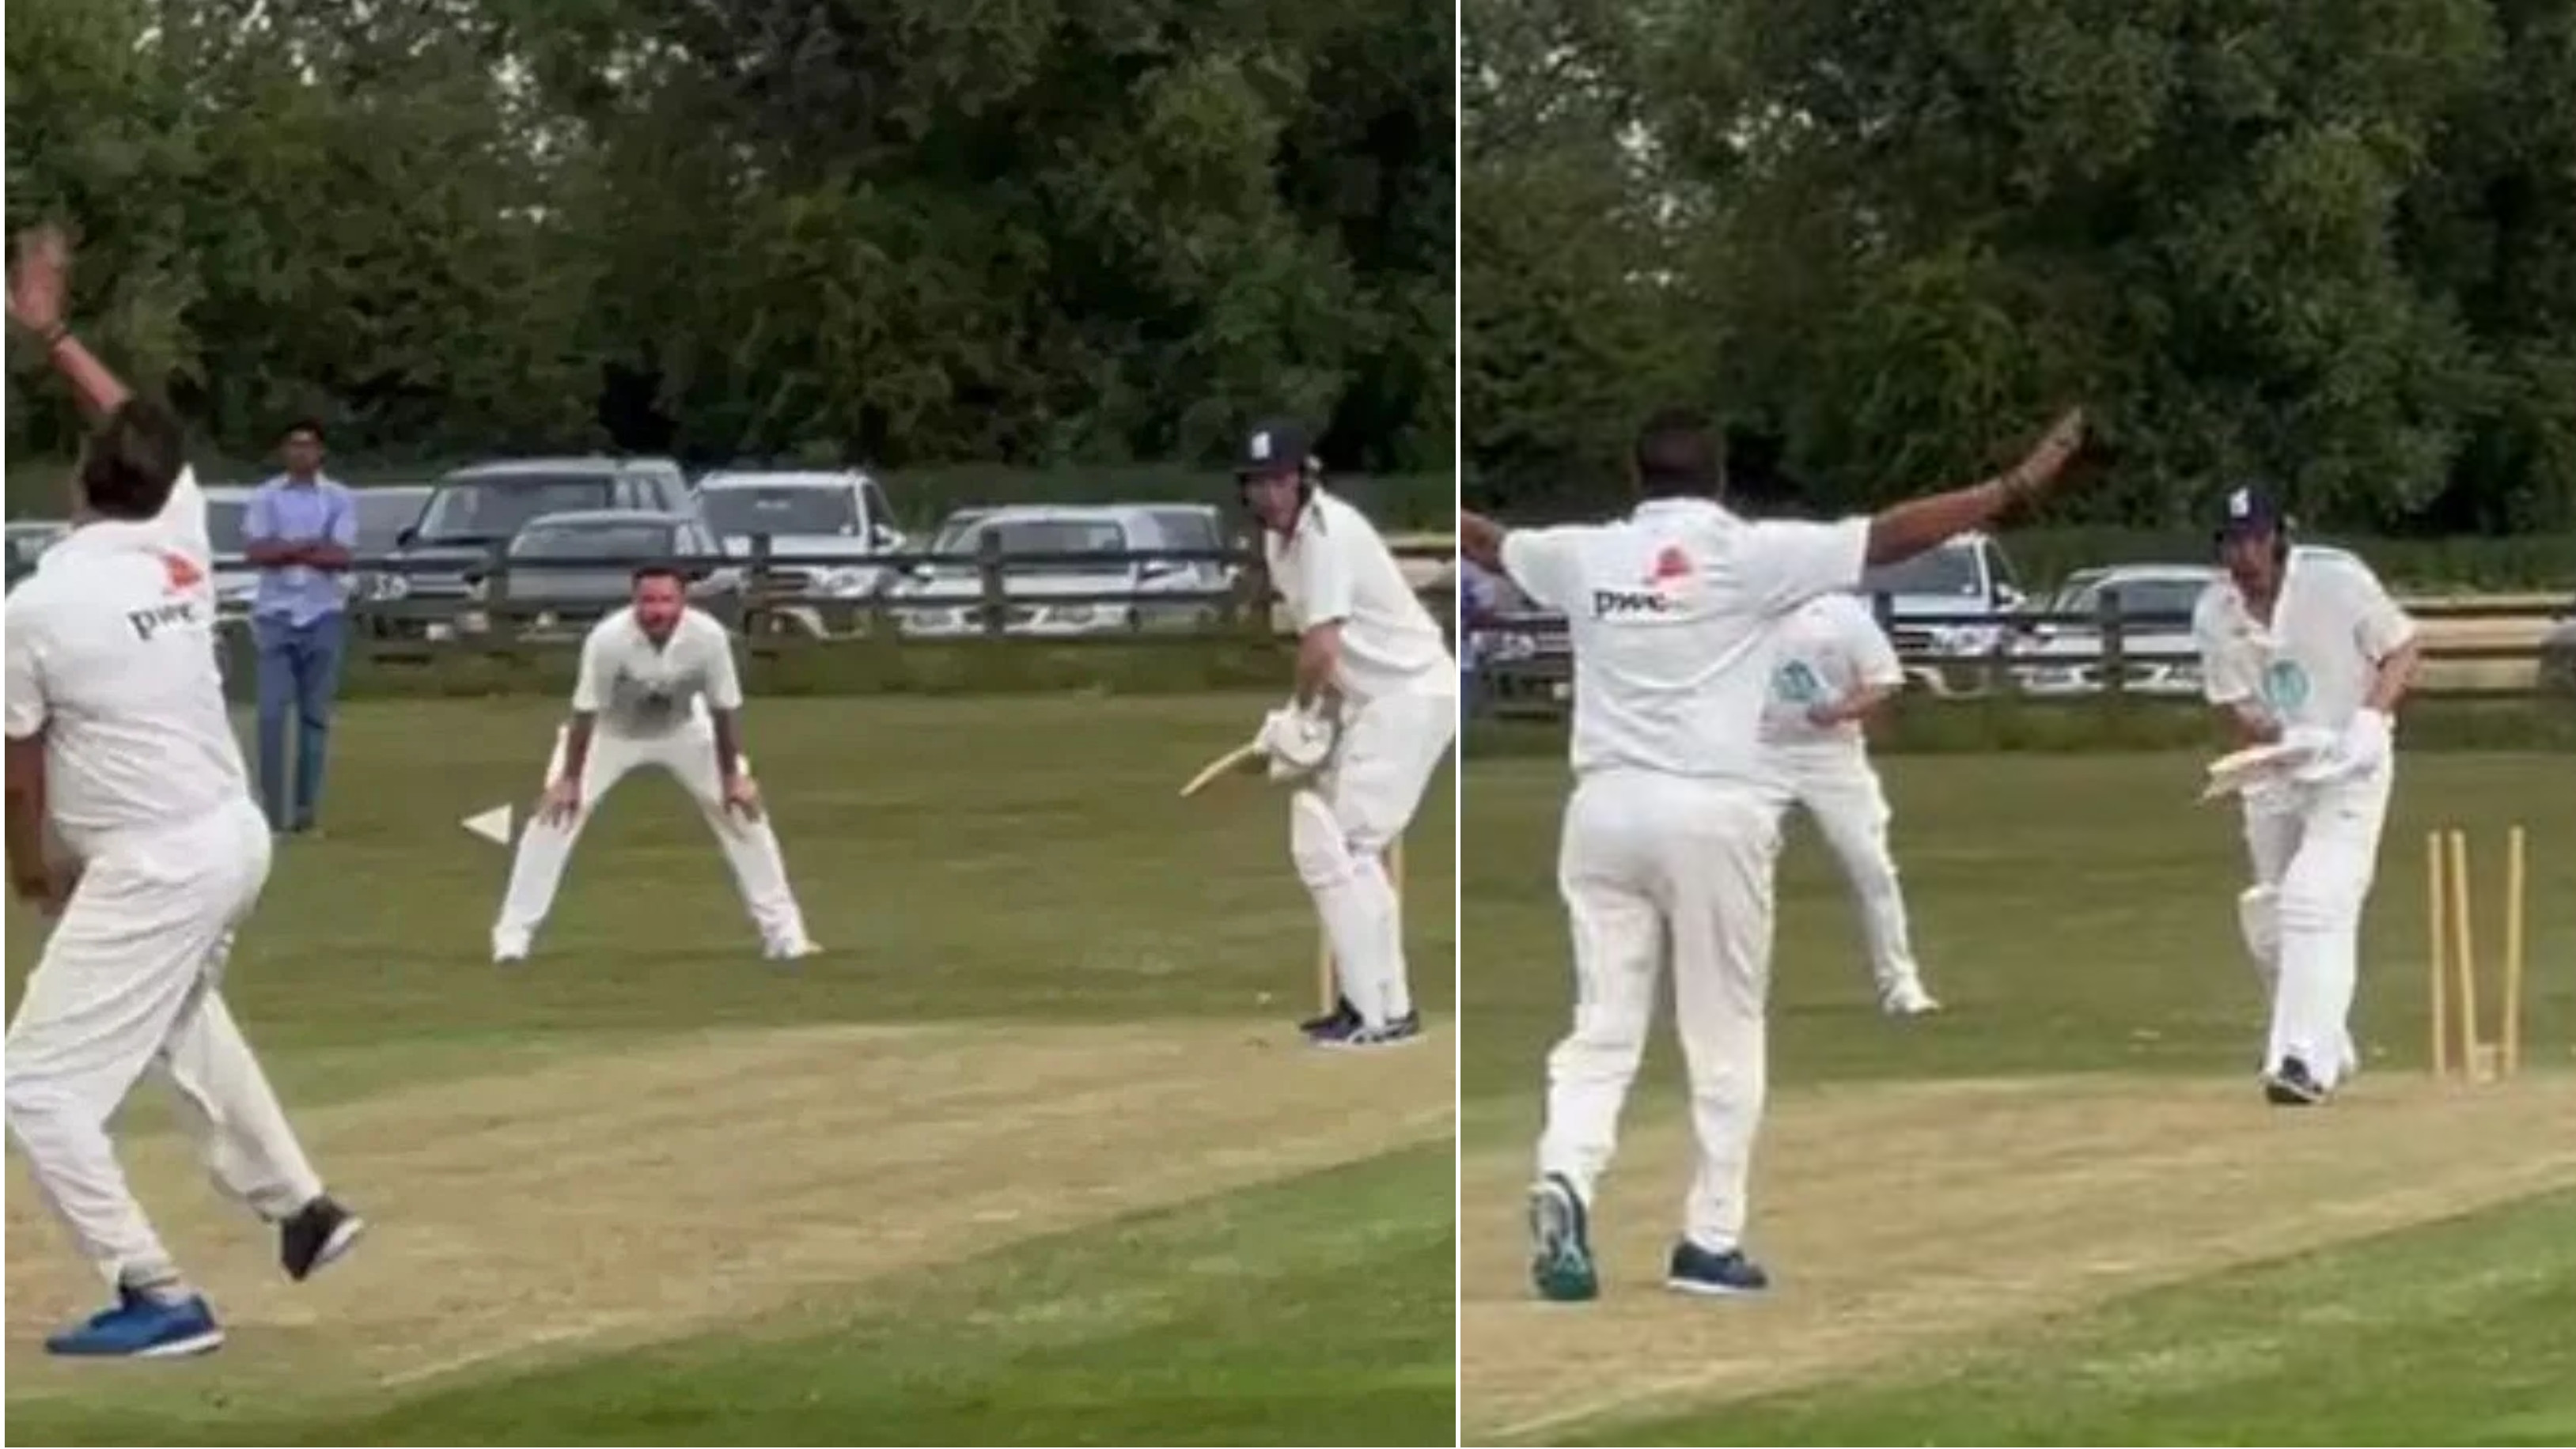 WATCH: Wasim Akram turns back the clock, cleans up Michael Atherton with a toe-crushing yorker